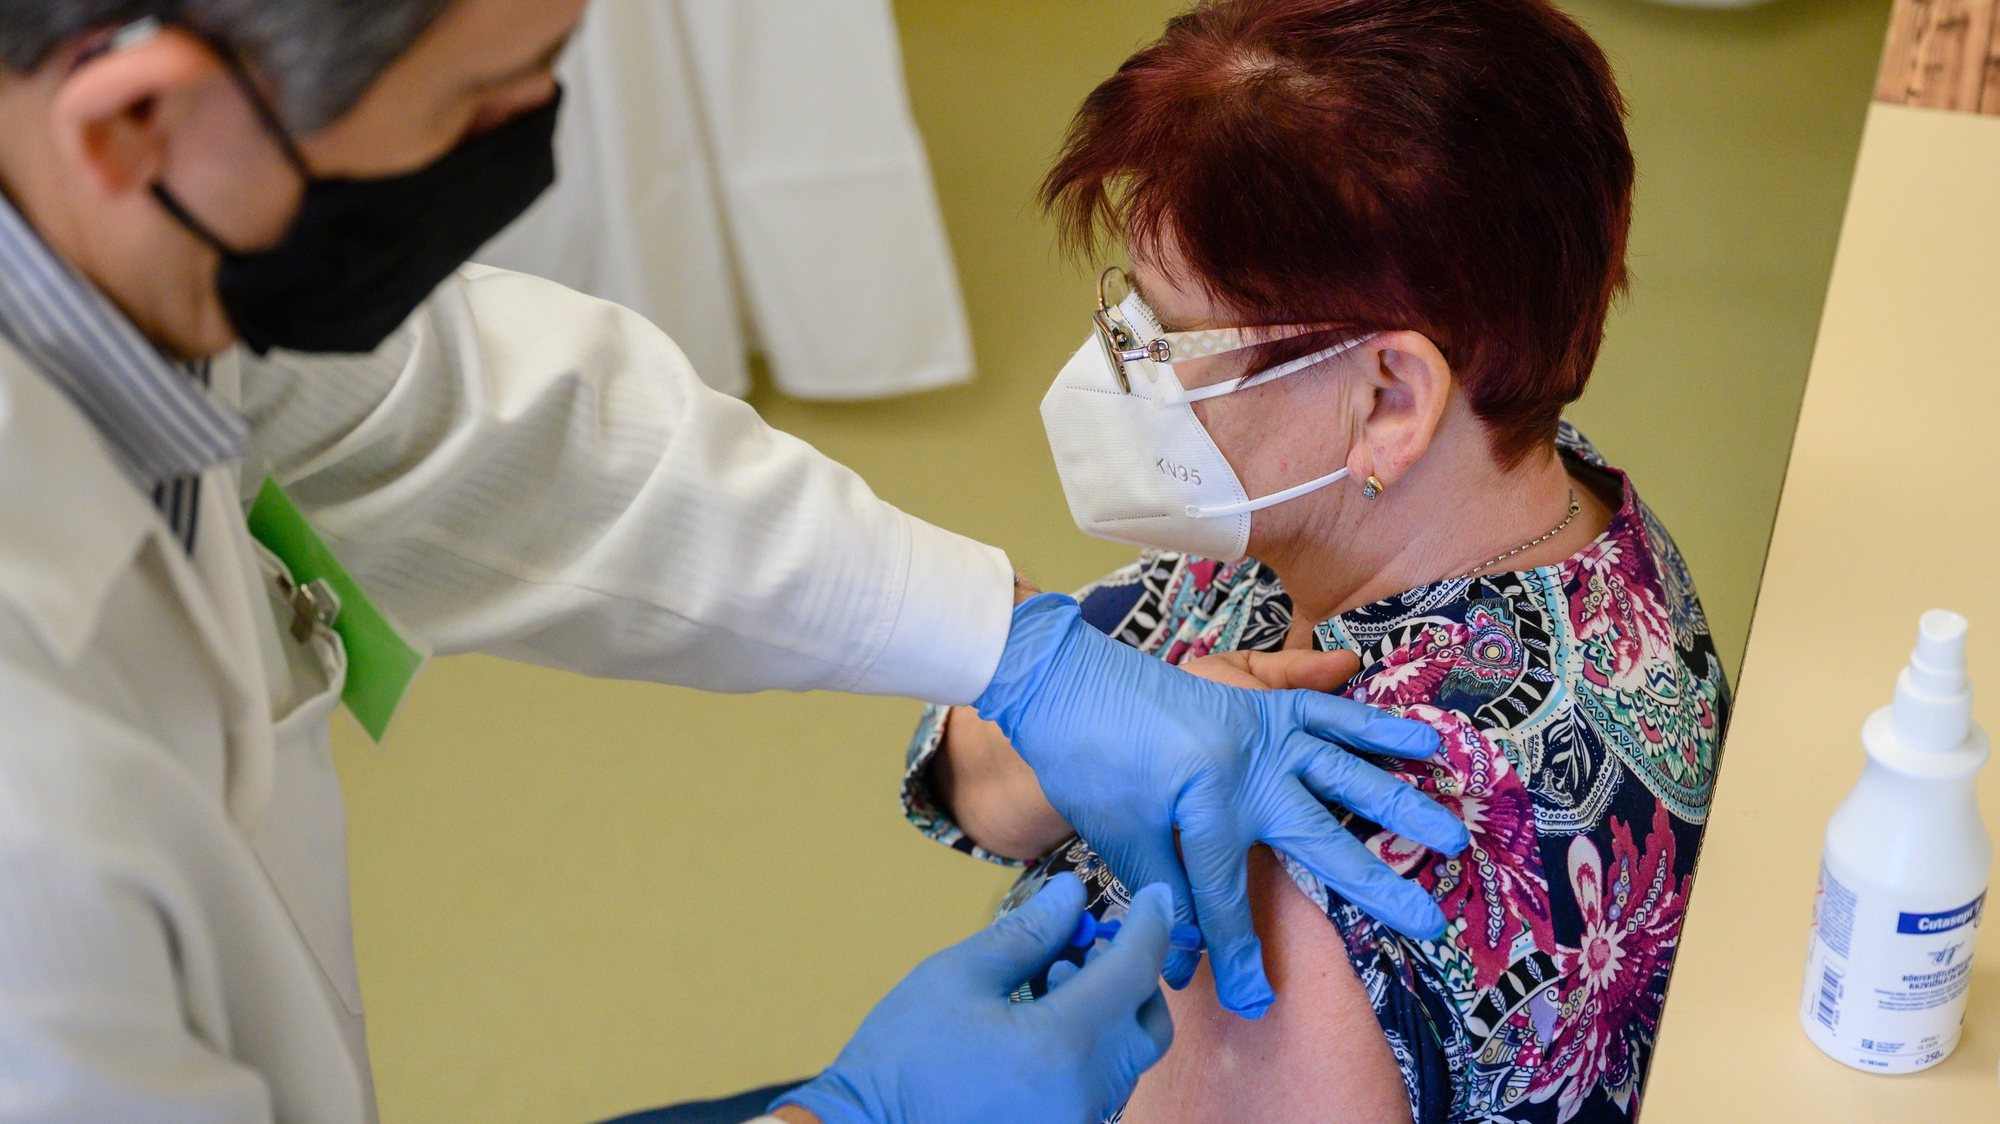 epa09087622 A health worker administers the first dose of the Russian vaccine Sputnik V to a patient at Szent Gyorgy Training Hospital in Szekesfehervar, Hungary, 21 March 2021, as the vaccination with Sputnik V against Covid-19 continues in the country.  EPA/Tamas Vasvari HUNGARY OUT